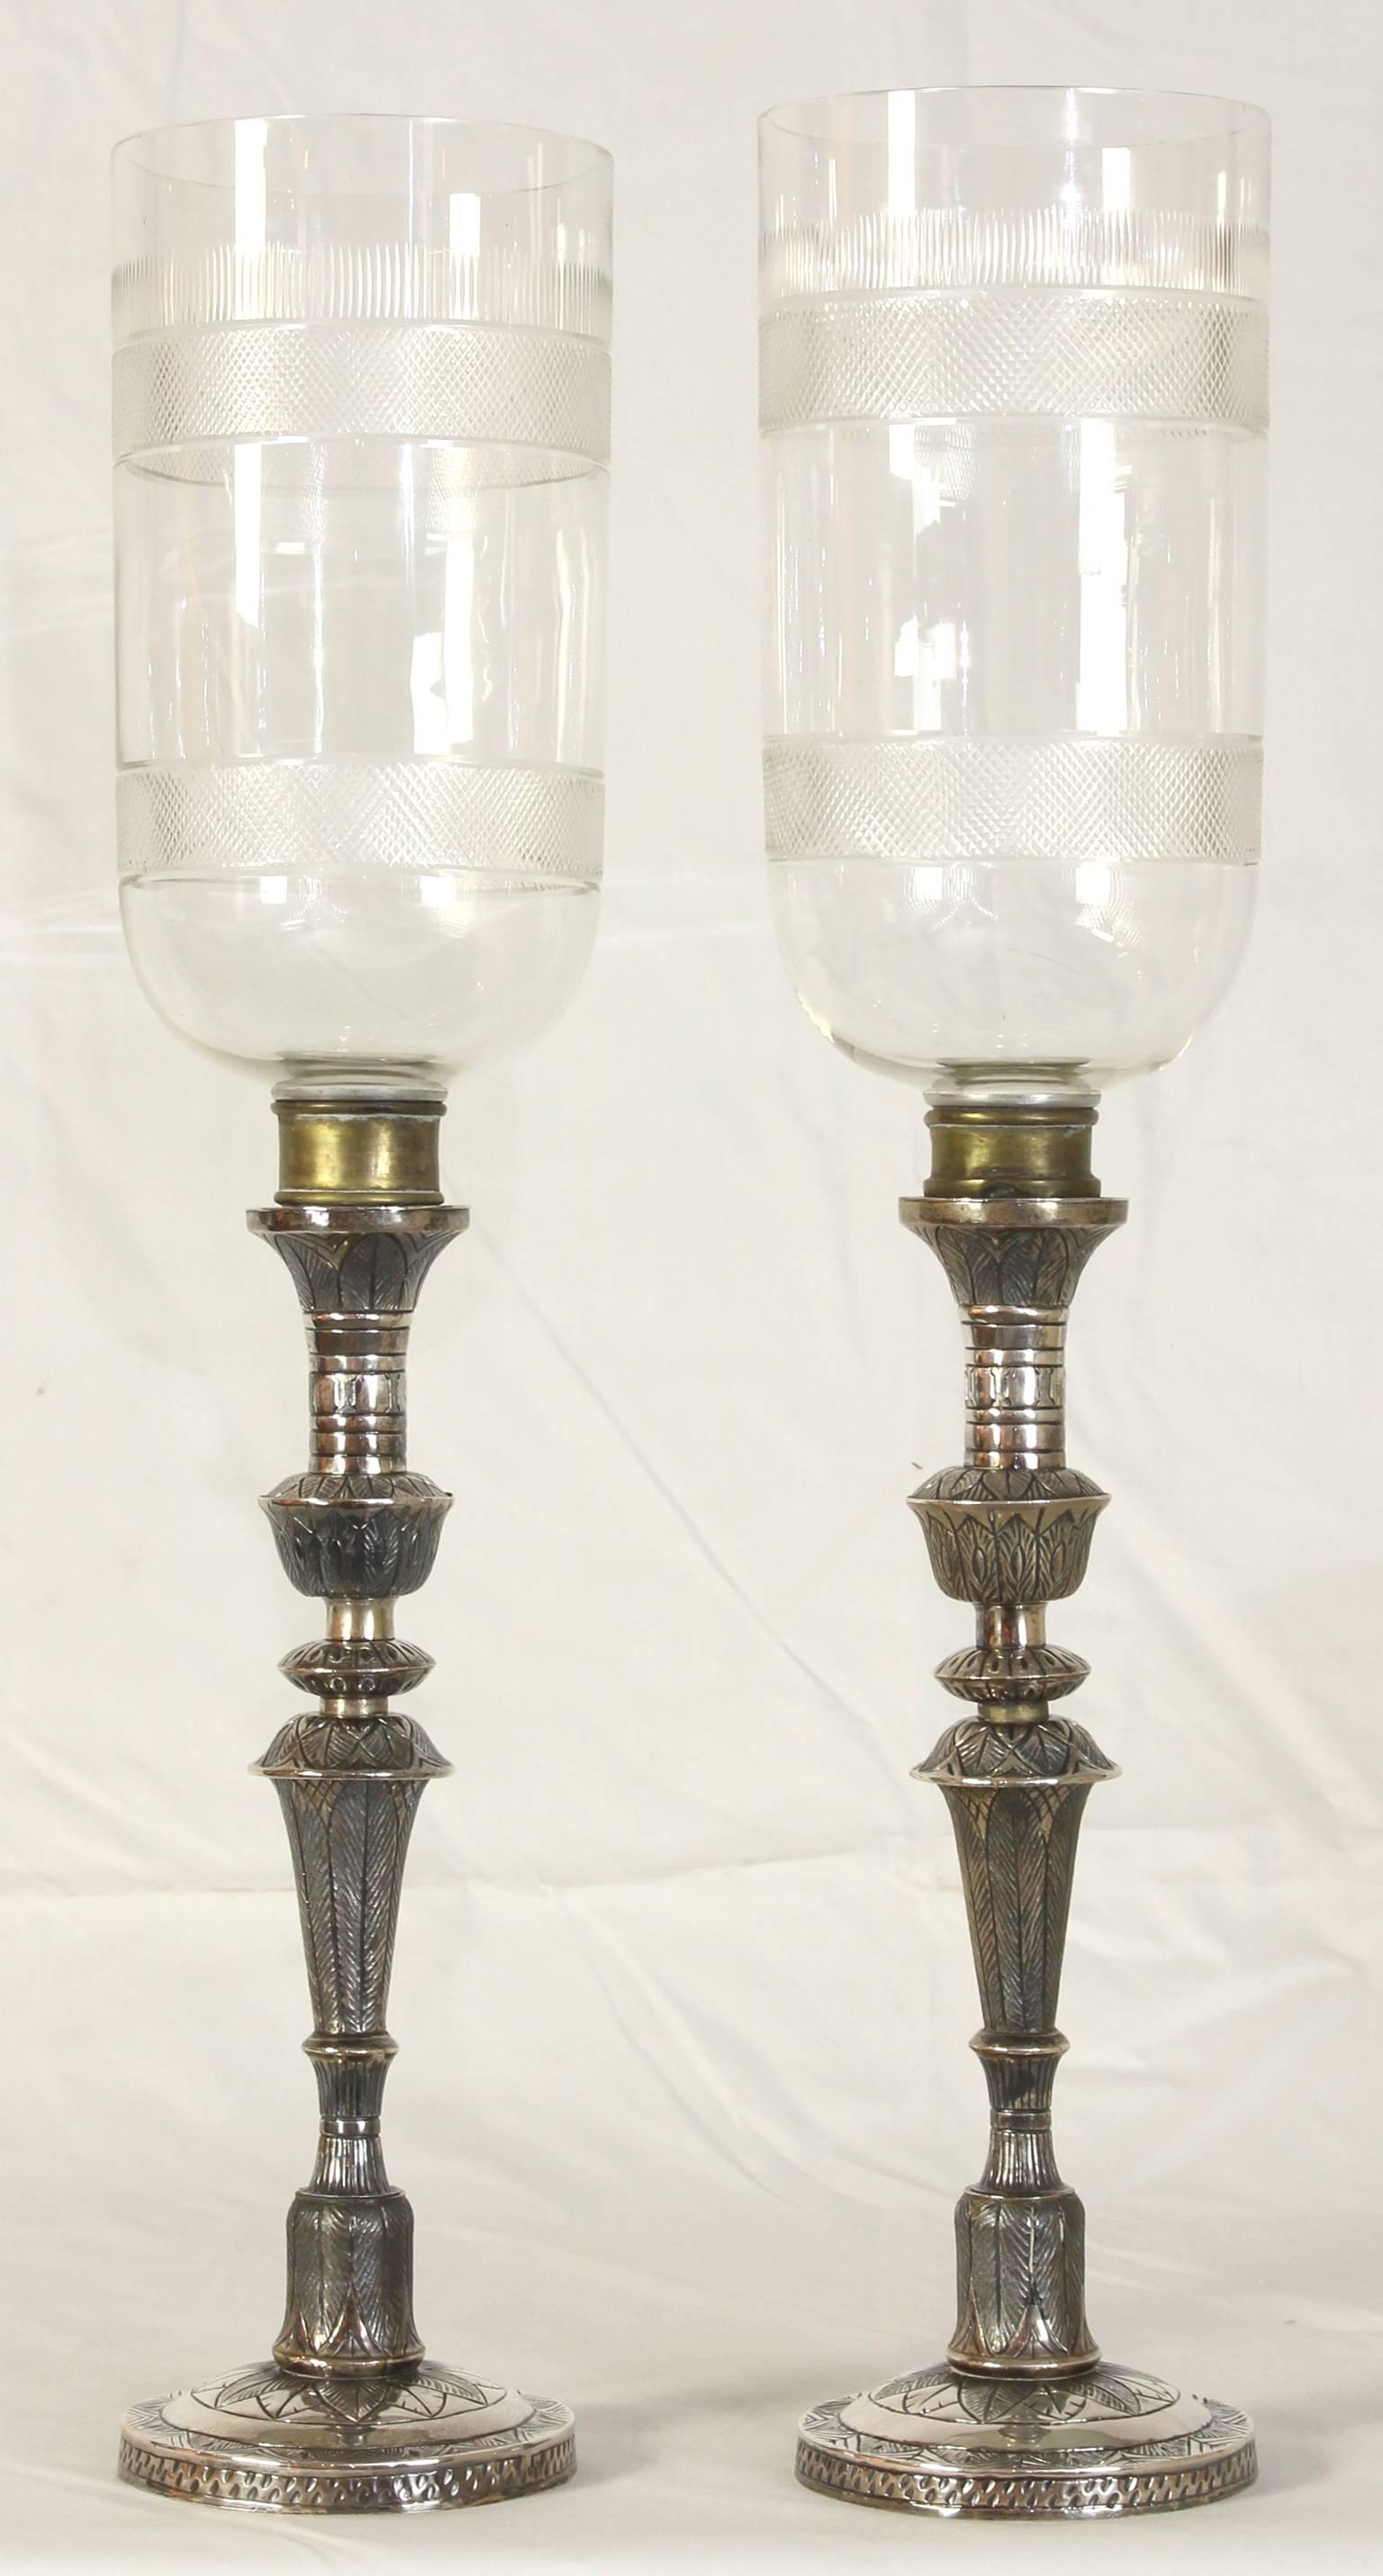 A exceptionally large pair of mid-19th Century Anglo-Indian Silver candlesticks with cut crystal hurricane globes.